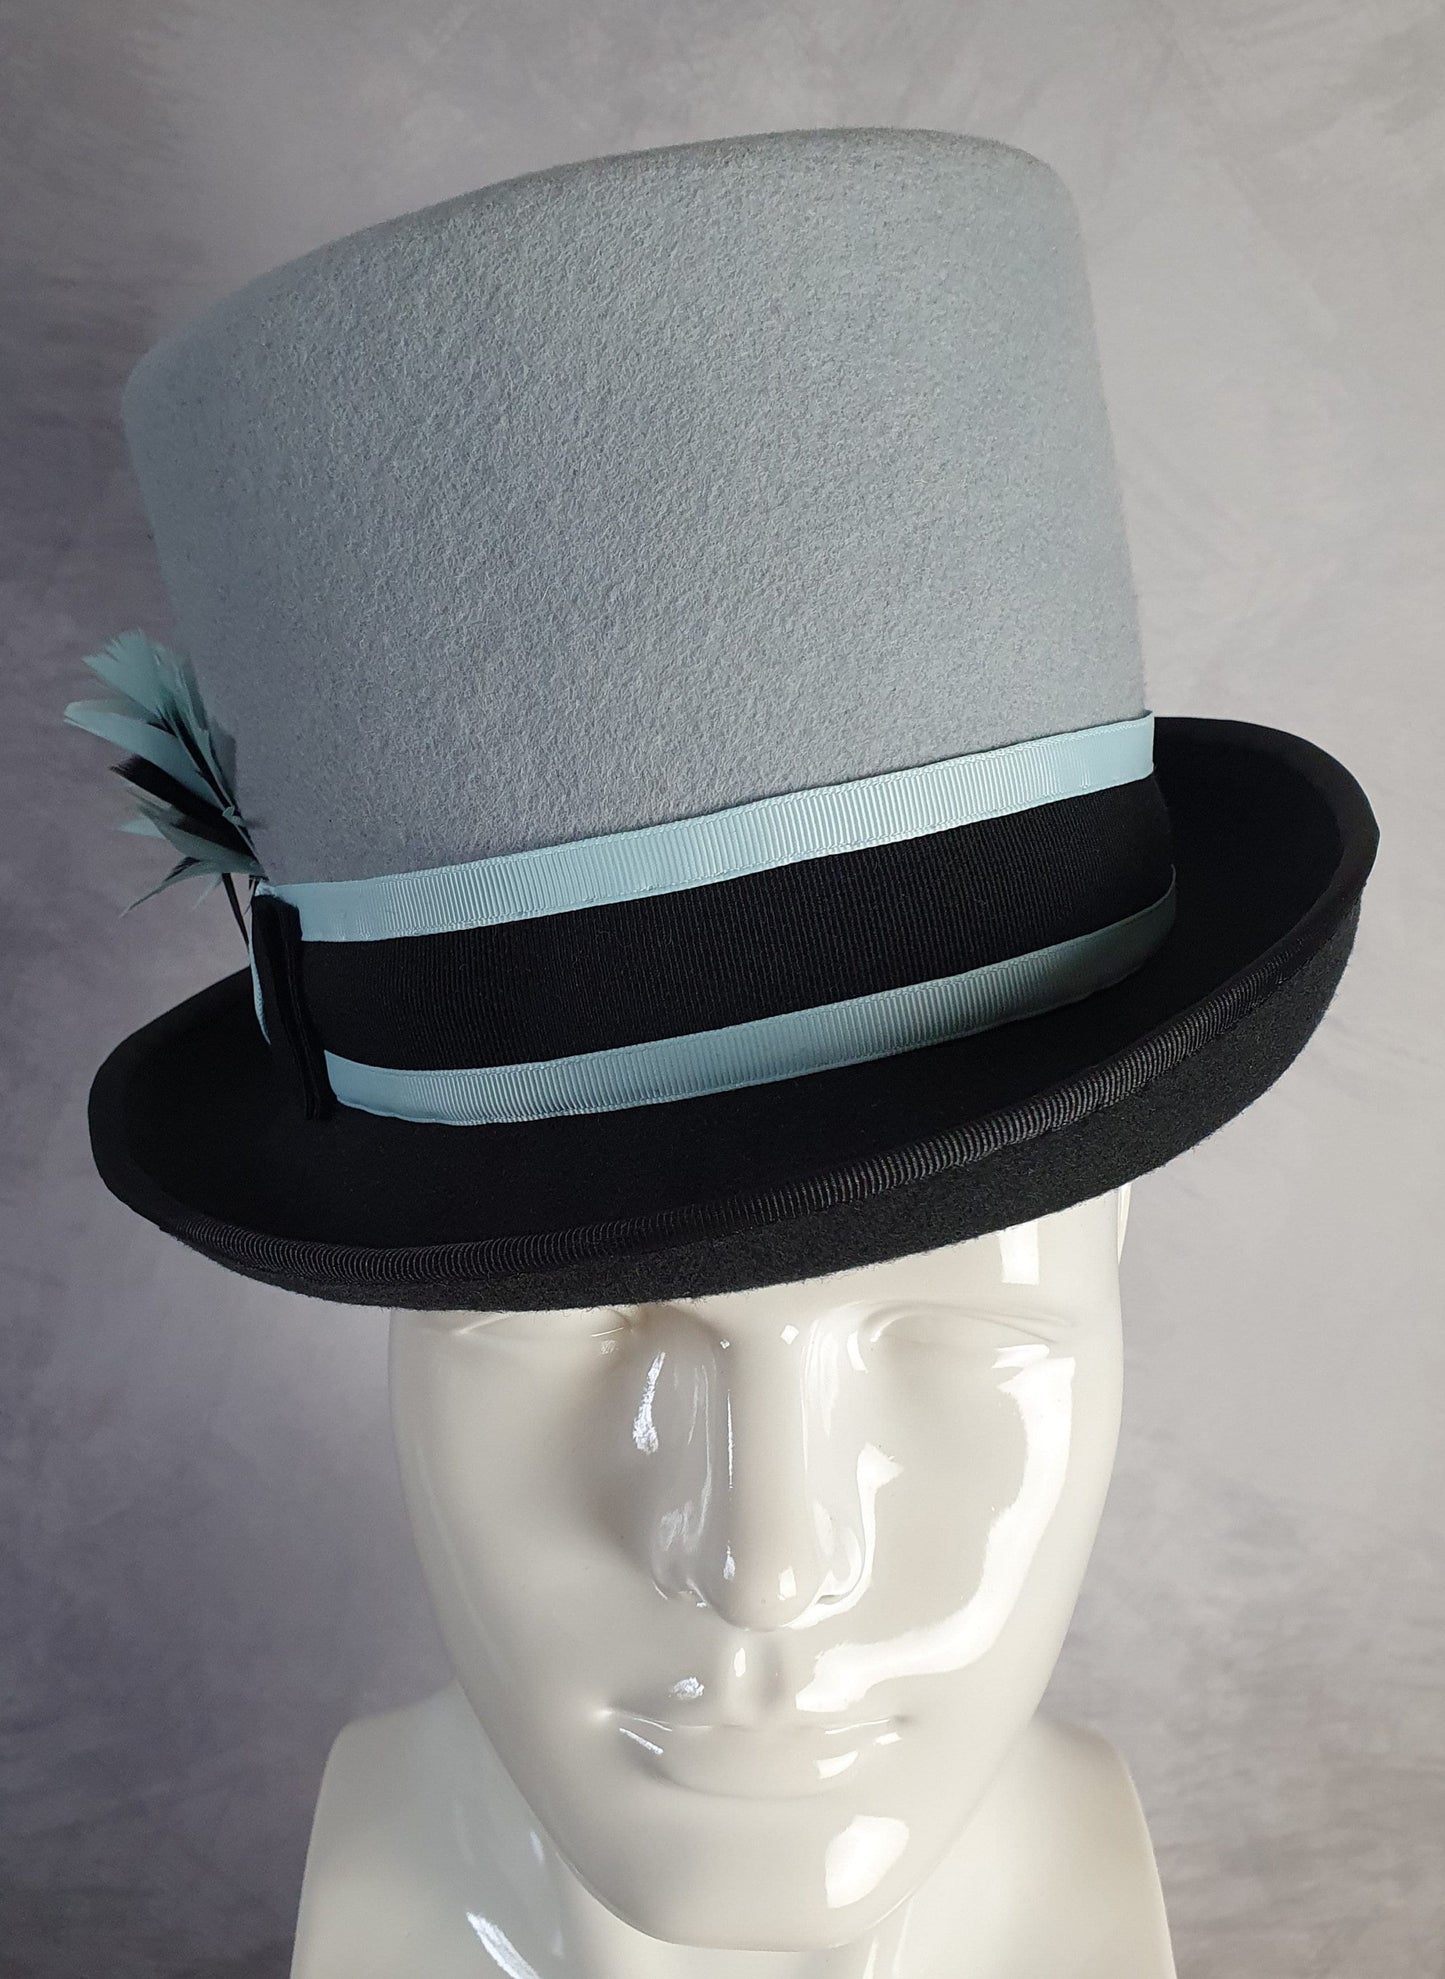 Handmade felt hat with pheasant feathers, blue with dark gray top hat, unisex hat, Victorian hat - perfect for special occasions